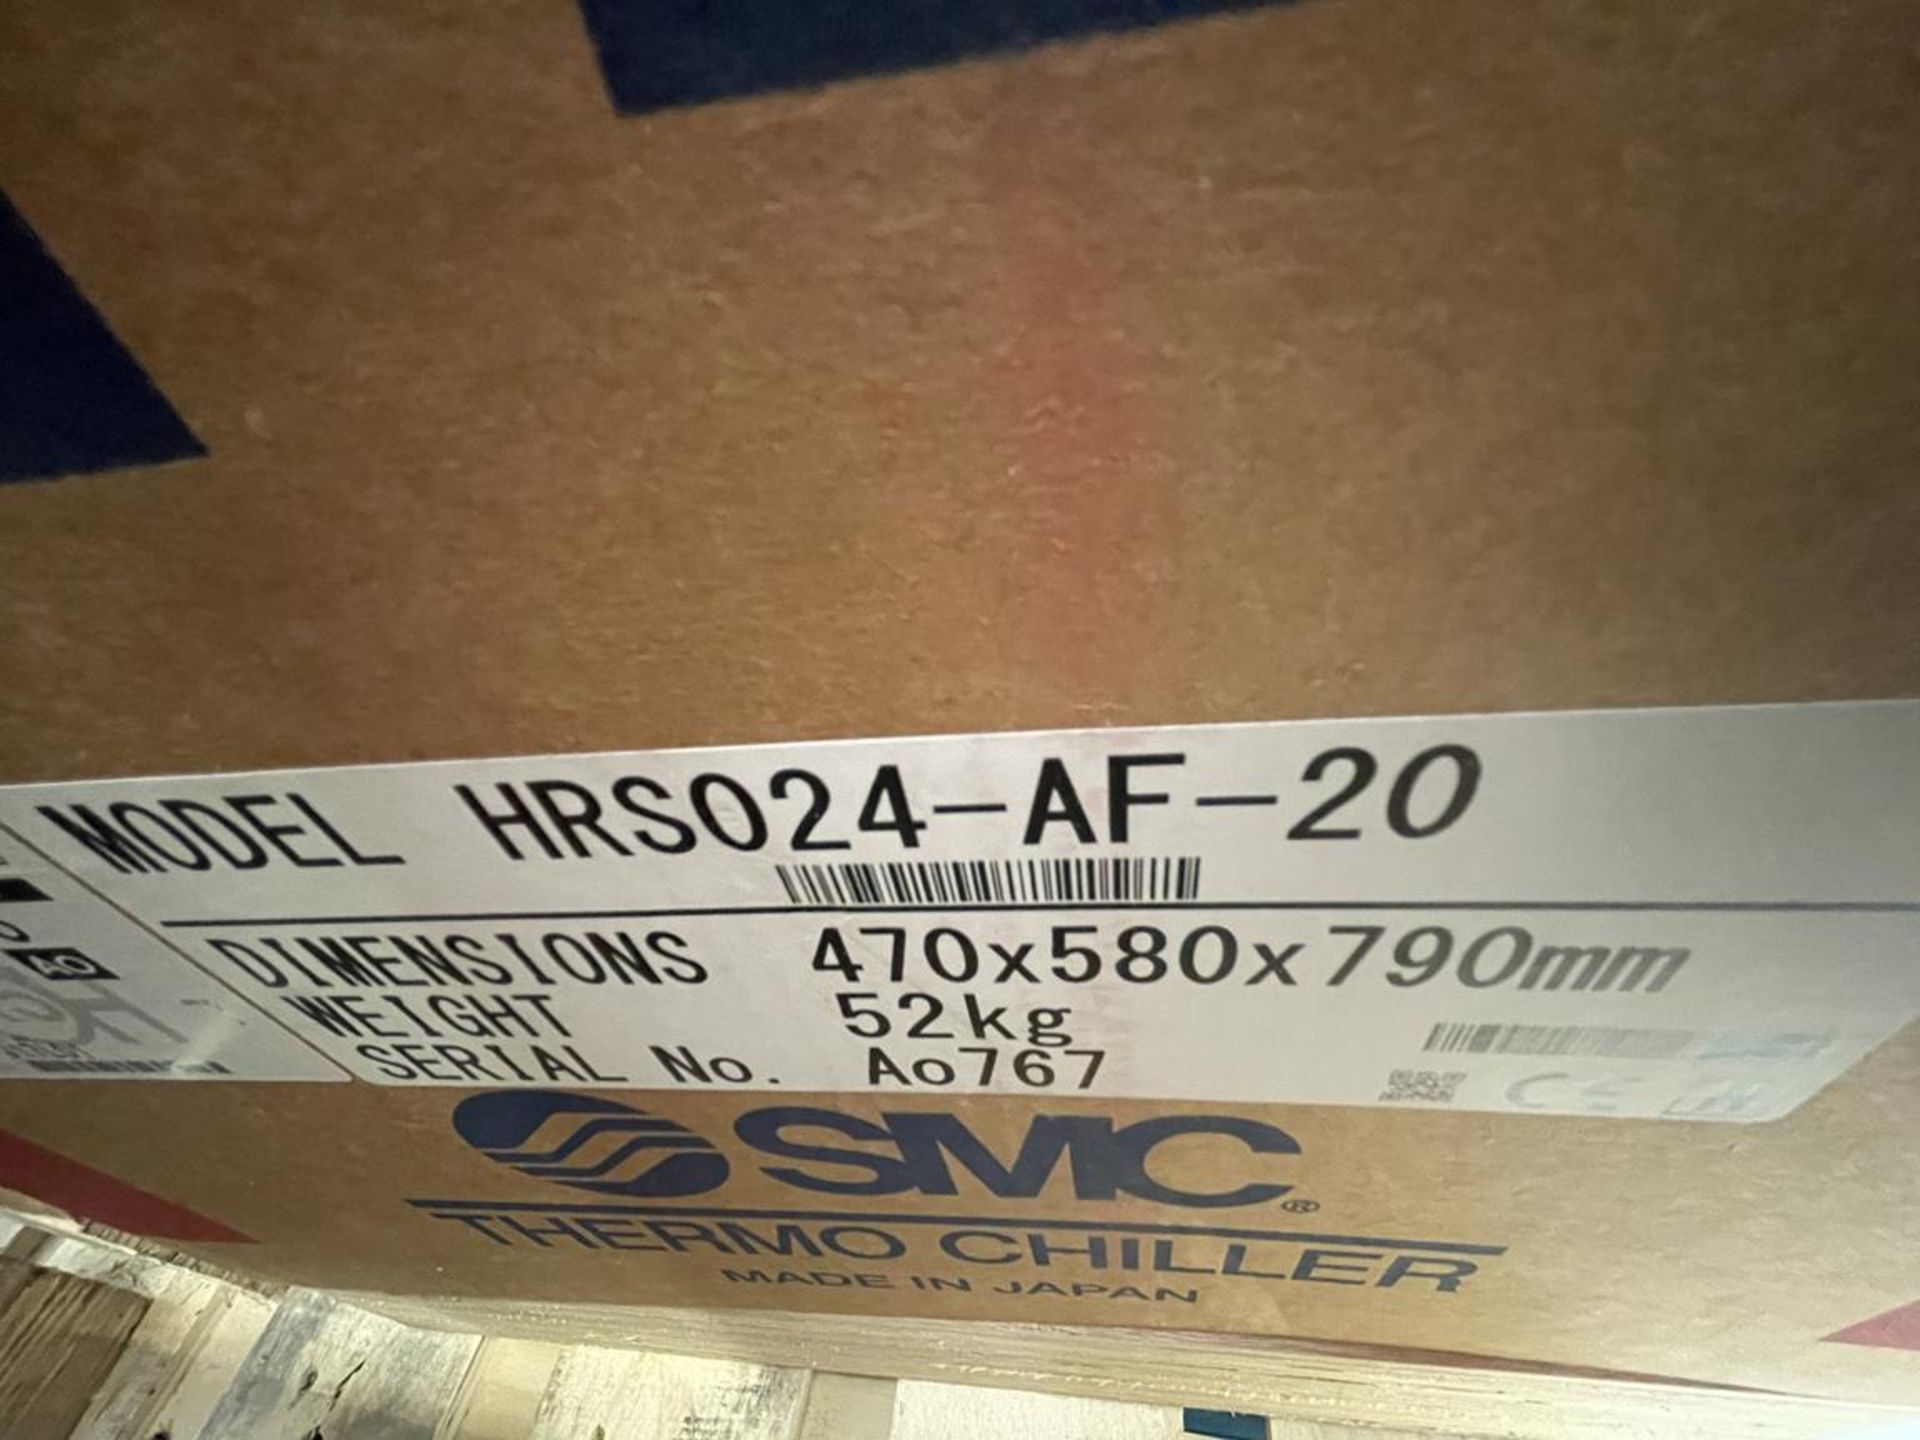 SMC, HRS024-AF-20 thermo chiller, Serial No. AO767 (DOM: 2021) (boxed and unused) - Image 2 of 2